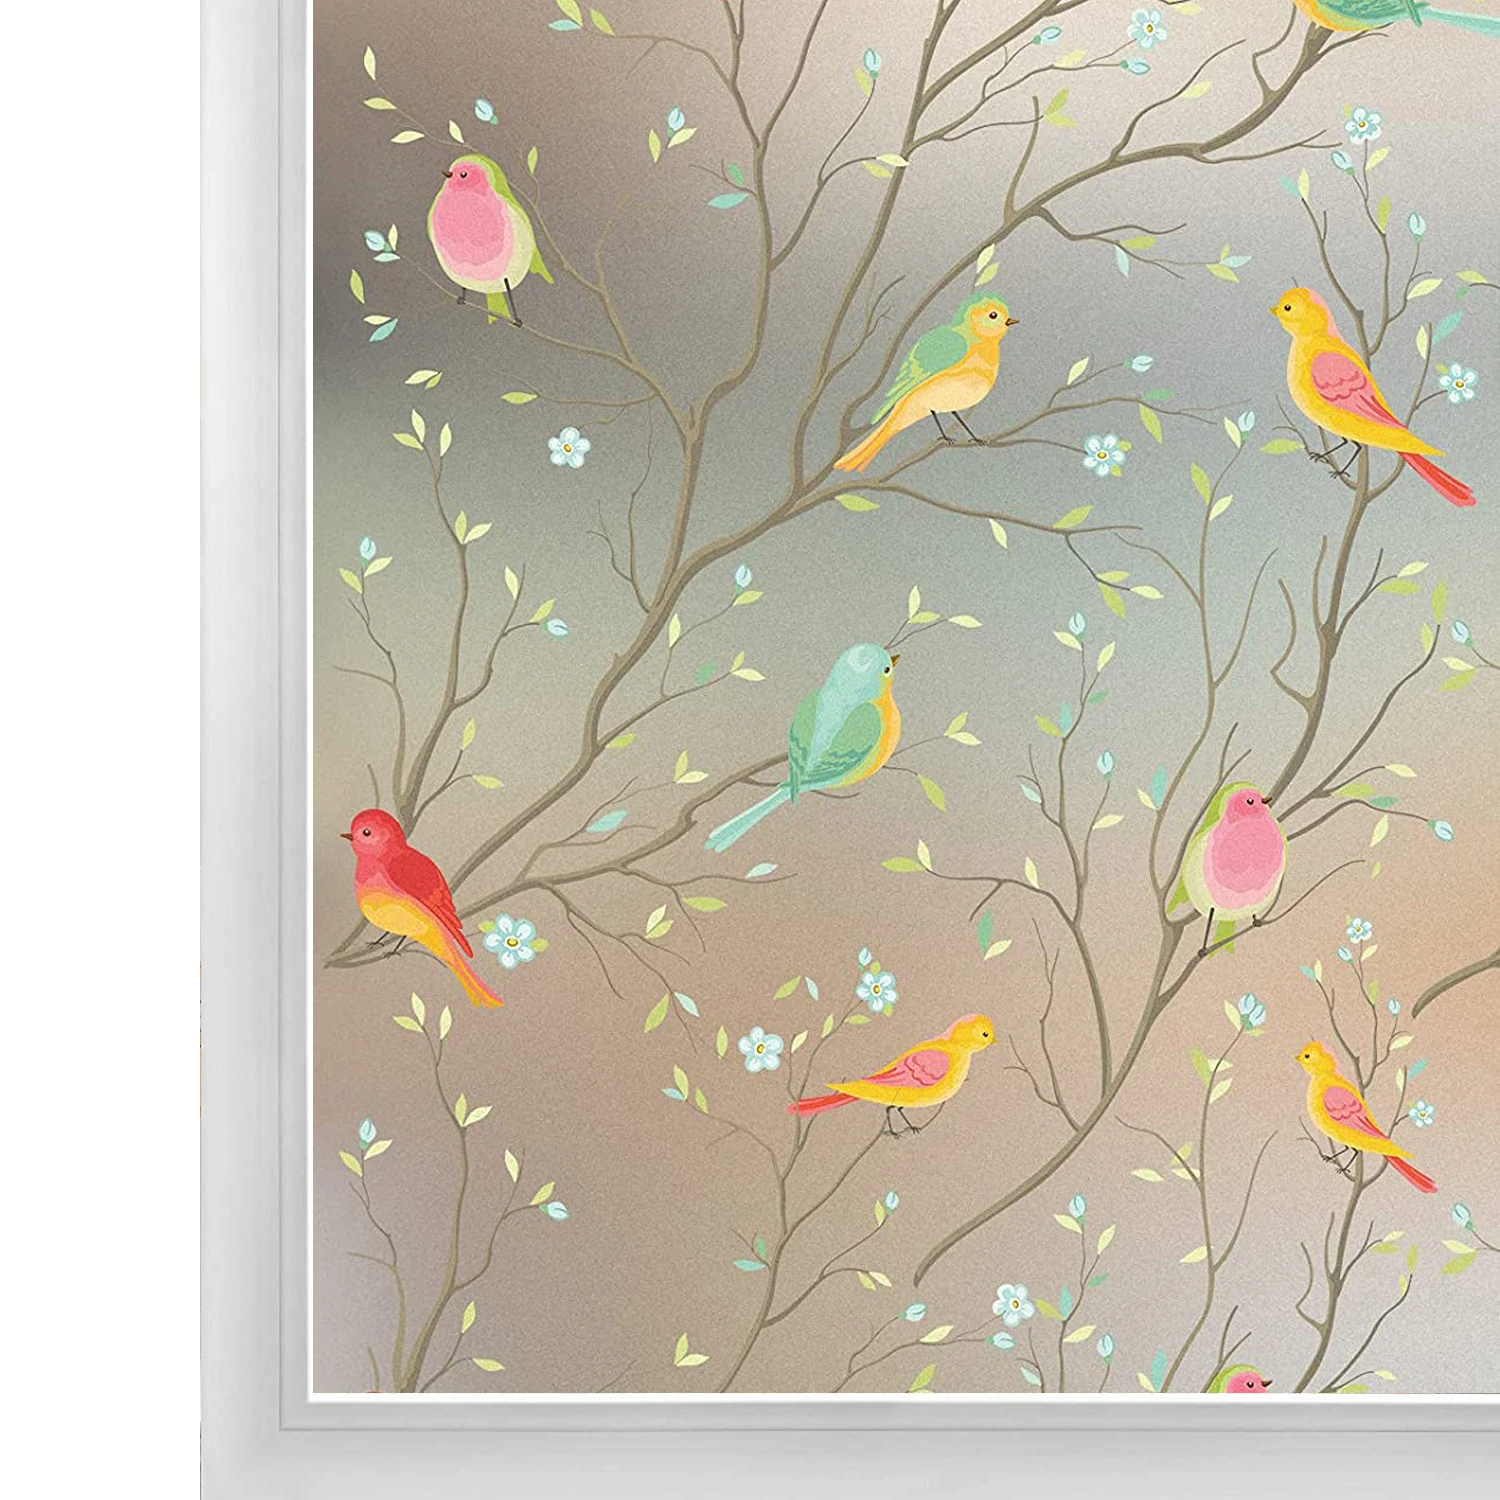 

Privacy Window Film Opaque Non-Adhesive Bird Decals Decorative Glass Covering Static Cling Tint Frosted Window Stickers for Home